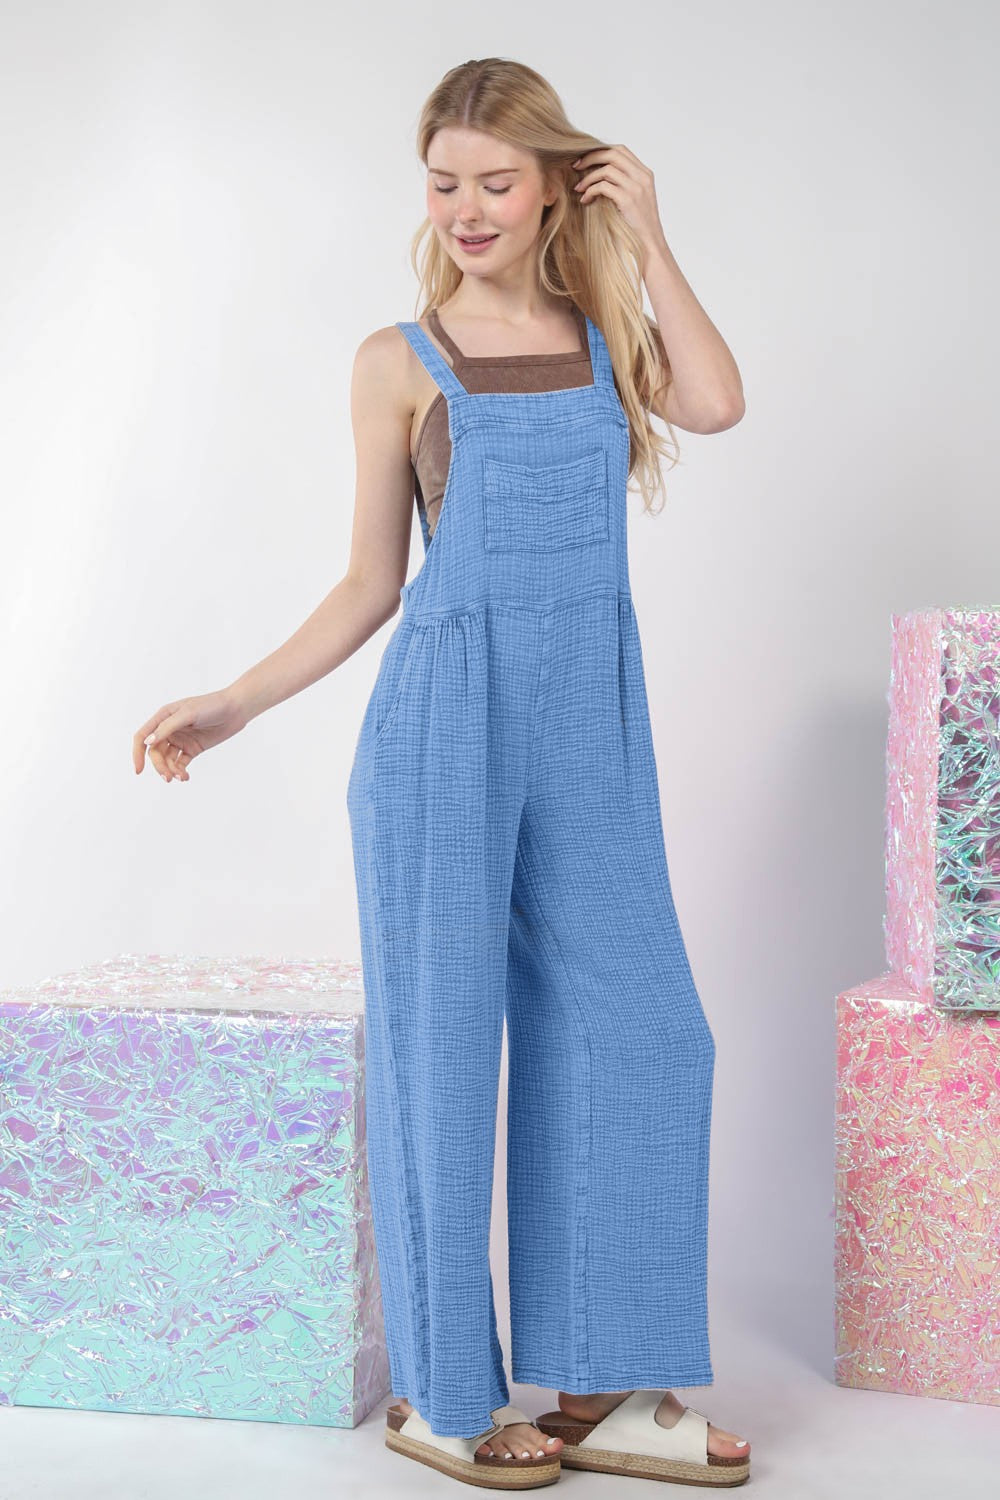 Mineral Wash Overalls in Blue